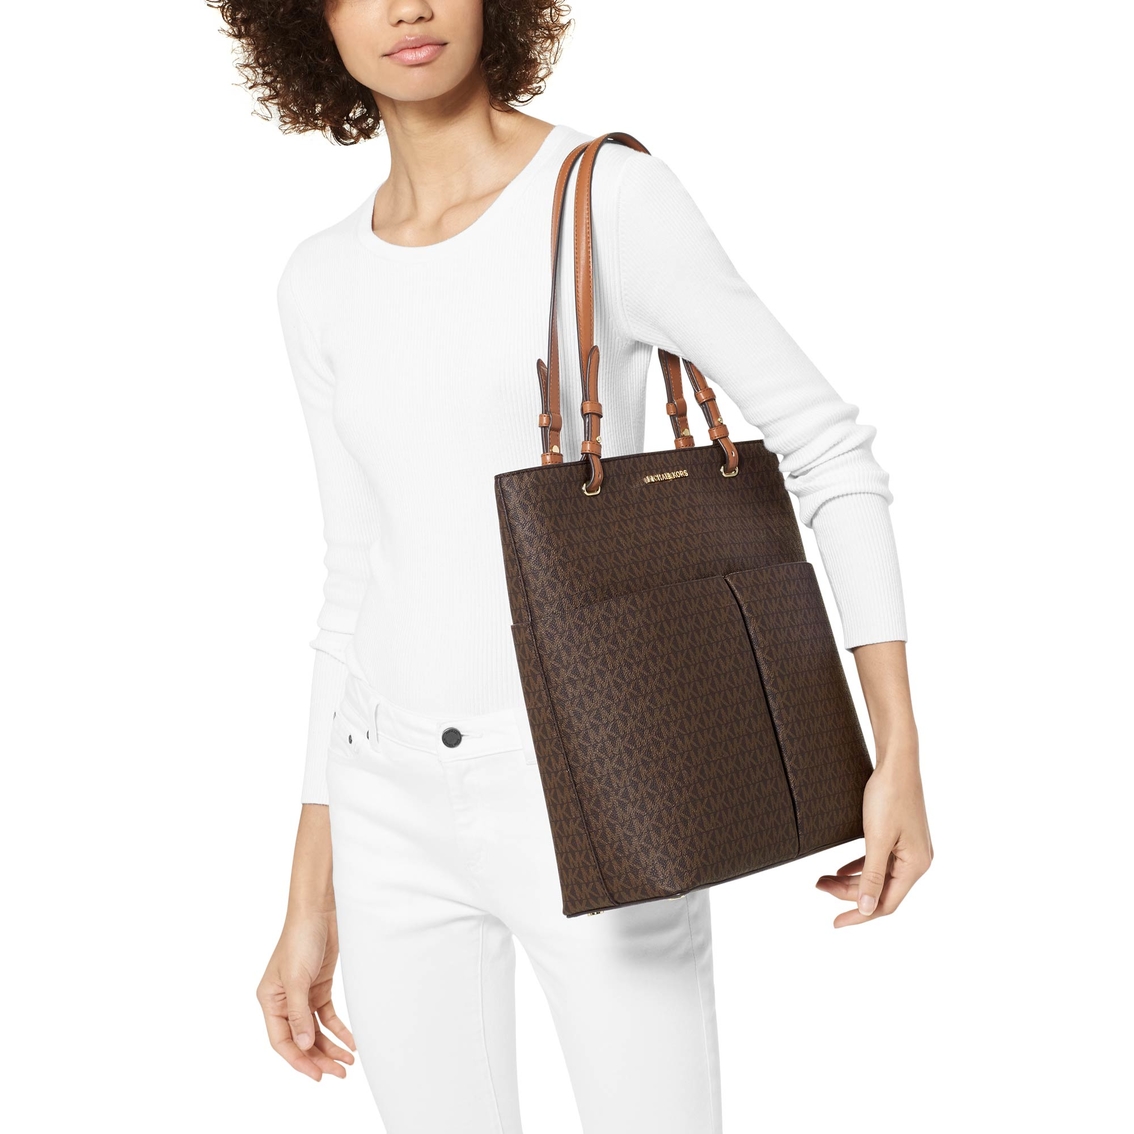 Michael Kors Bedford Large North Signature Tote - Image 4 of 4